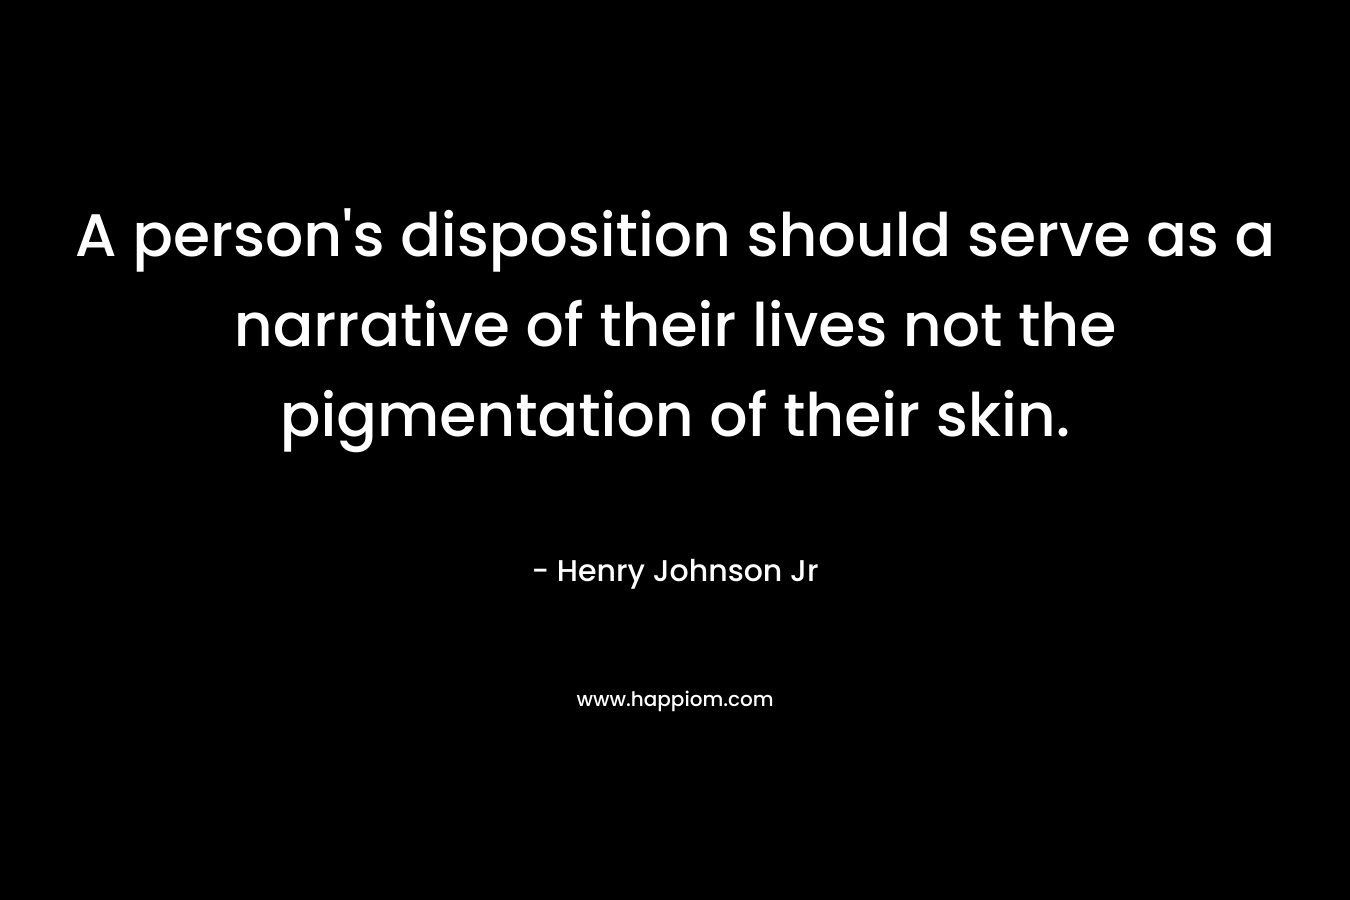 A person’s disposition should serve as a narrative of their lives not the pigmentation of their skin. – Henry Johnson Jr